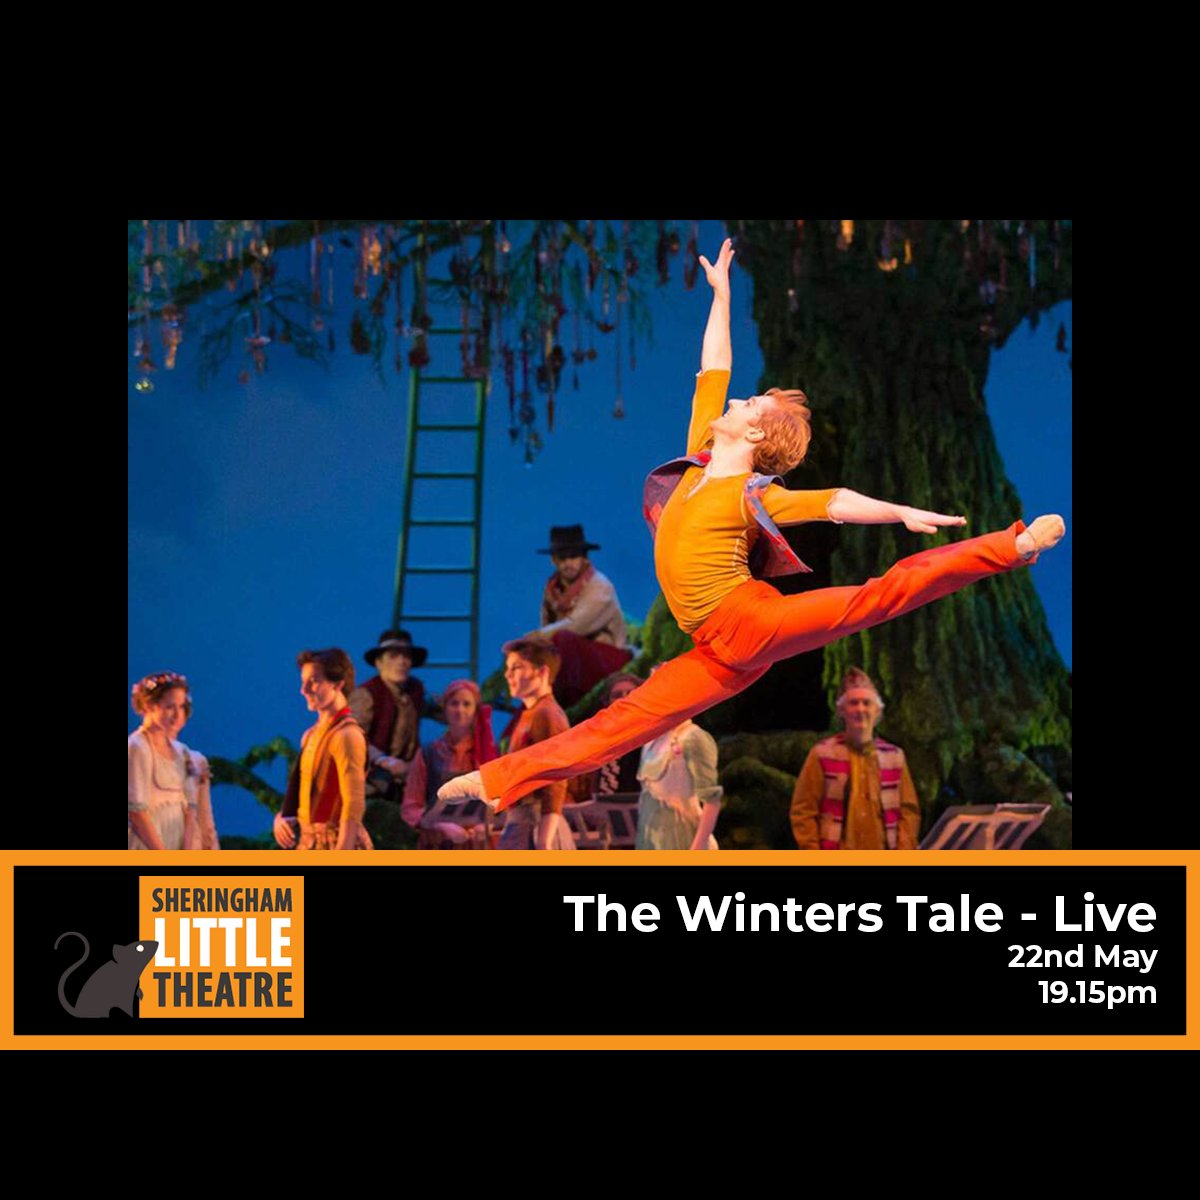 Join us for a screening of The Winters Tale, live from The Royal Opera House. 🗓 22nd May 🕰 19.15pm 📍 Sheringham Little Theatre 🎟 …eringhamlittletheatre.ticketsolve.com/ticketbooth/sh…